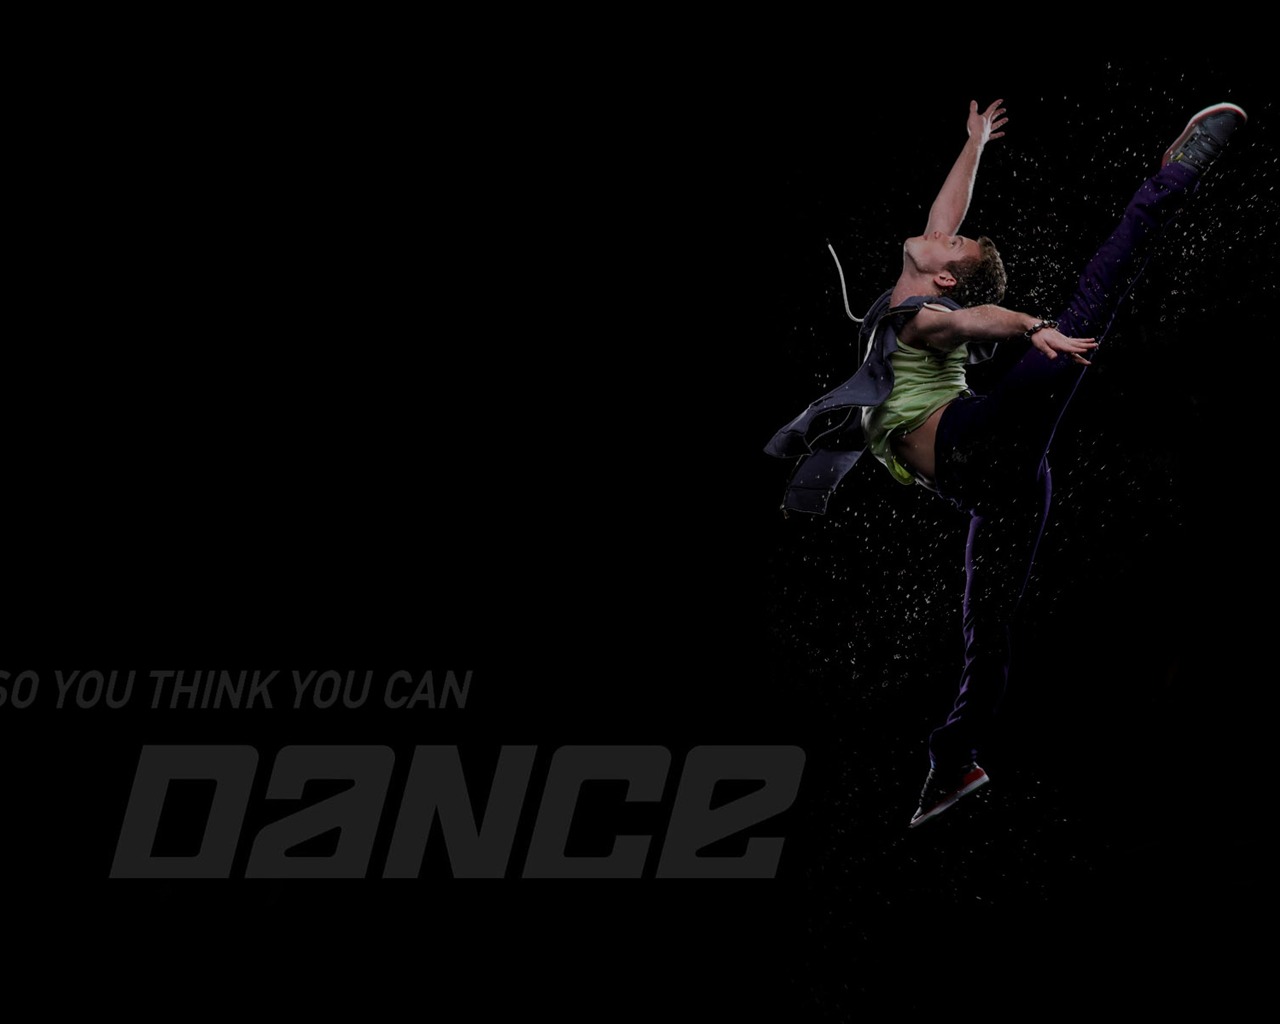 So You Think You Can Dance 舞林爭霸壁紙(二) #8 - 1280x1024